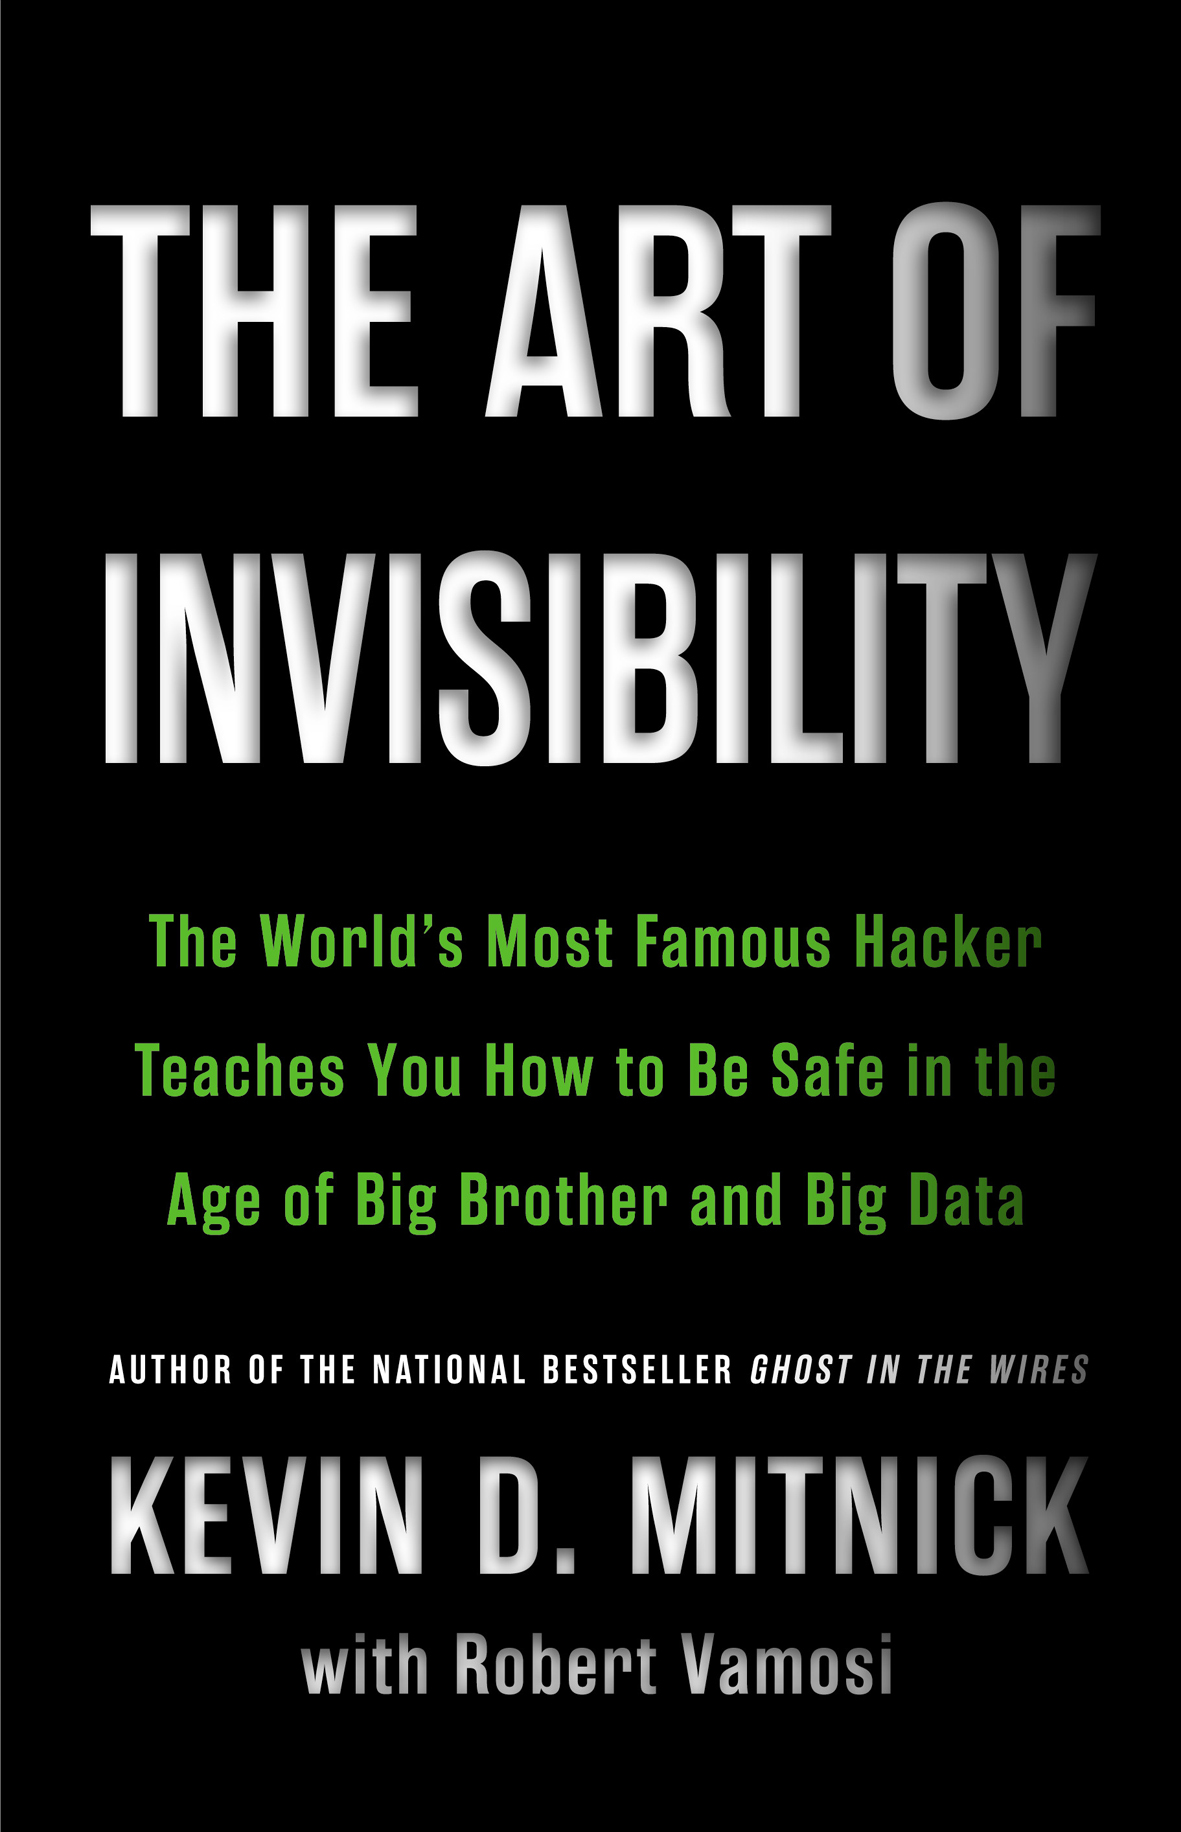 Book 1832 620 the art of invisibility: the world's most famous hacker teaches you how to be safe in the age of big brother and big data